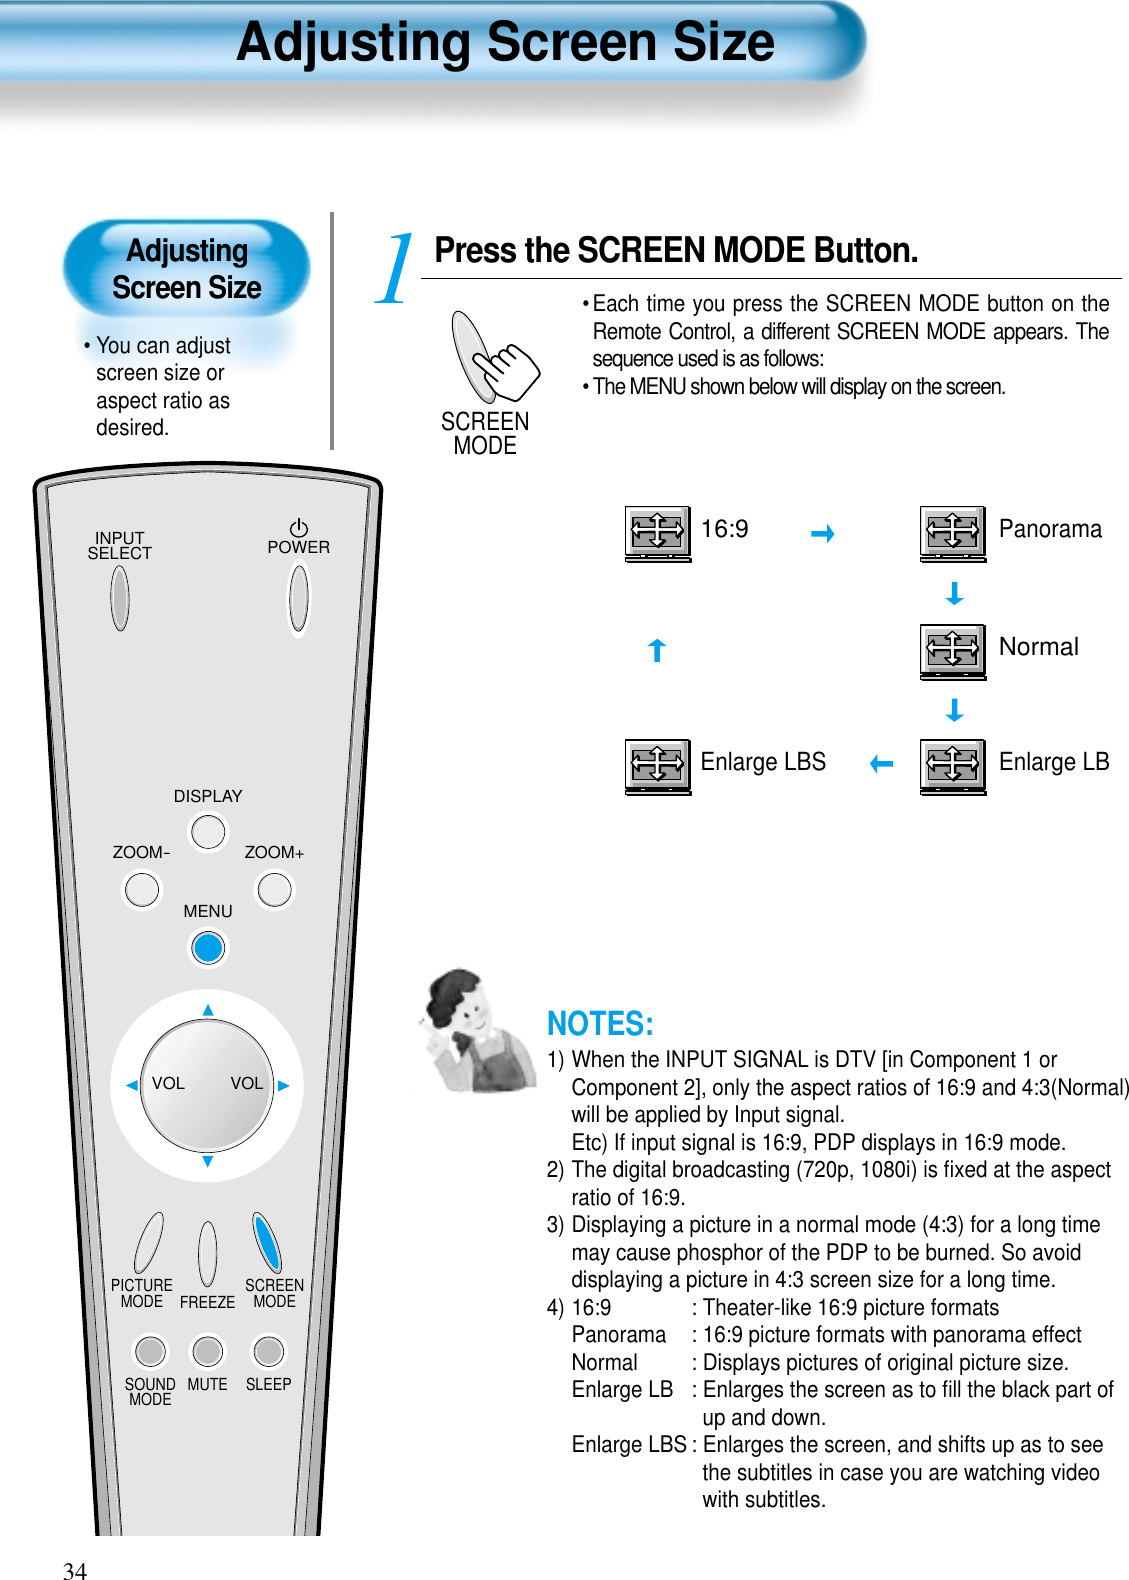 Adjusting Screen Size• You can adjustscreen size oraspect ratio asdesired.Adjusting Screen Size34INPUTSELECT POWERDISPLAYZOOM-PICTUREMODE SCREENMODEFREEZEMUTESOUNDMODE SLEEPZOOM+MENUVOL VOLPress the SCREEN MODE Button.• Each time you press the SCREEN MODE button on theRemote Control, a different SCREEN MODE appears. Thesequence used is as follows:• The MENU shown below will display on the screen.1SCREENMODEEnlarge LBSNormal16:9PanoramaEnlarge LBNOTES:1) When the INPUT SIGNAL is DTV [in Component 1 orComponent 2], only the aspect ratios of 16:9 and 4:3(Normal)will be applied by Input signal.Etc) If input signal is 16:9, PDP displays in 16:9 mode.2) The digital broadcasting (720p, 1080i) is ﬁxed at the aspectratio of 16:9.3) Displaying a picture in a normal mode (4:3) for a long timemay cause phosphor of the PDP to be burned. So avoiddisplaying a picture in 4:3 screen size for a long time.4) 16:9  : Theater-like 16:9 picture formatsPanorama : 16:9 picture formats with panorama effectNormal  : Displays pictures of original picture size.Enlarge LB : Enlarges the screen as to ﬁll the black part ofup and down.Enlarge LBS : Enlarges the screen, and shifts up as to seethe subtitles in case you are watching videowith subtitles.